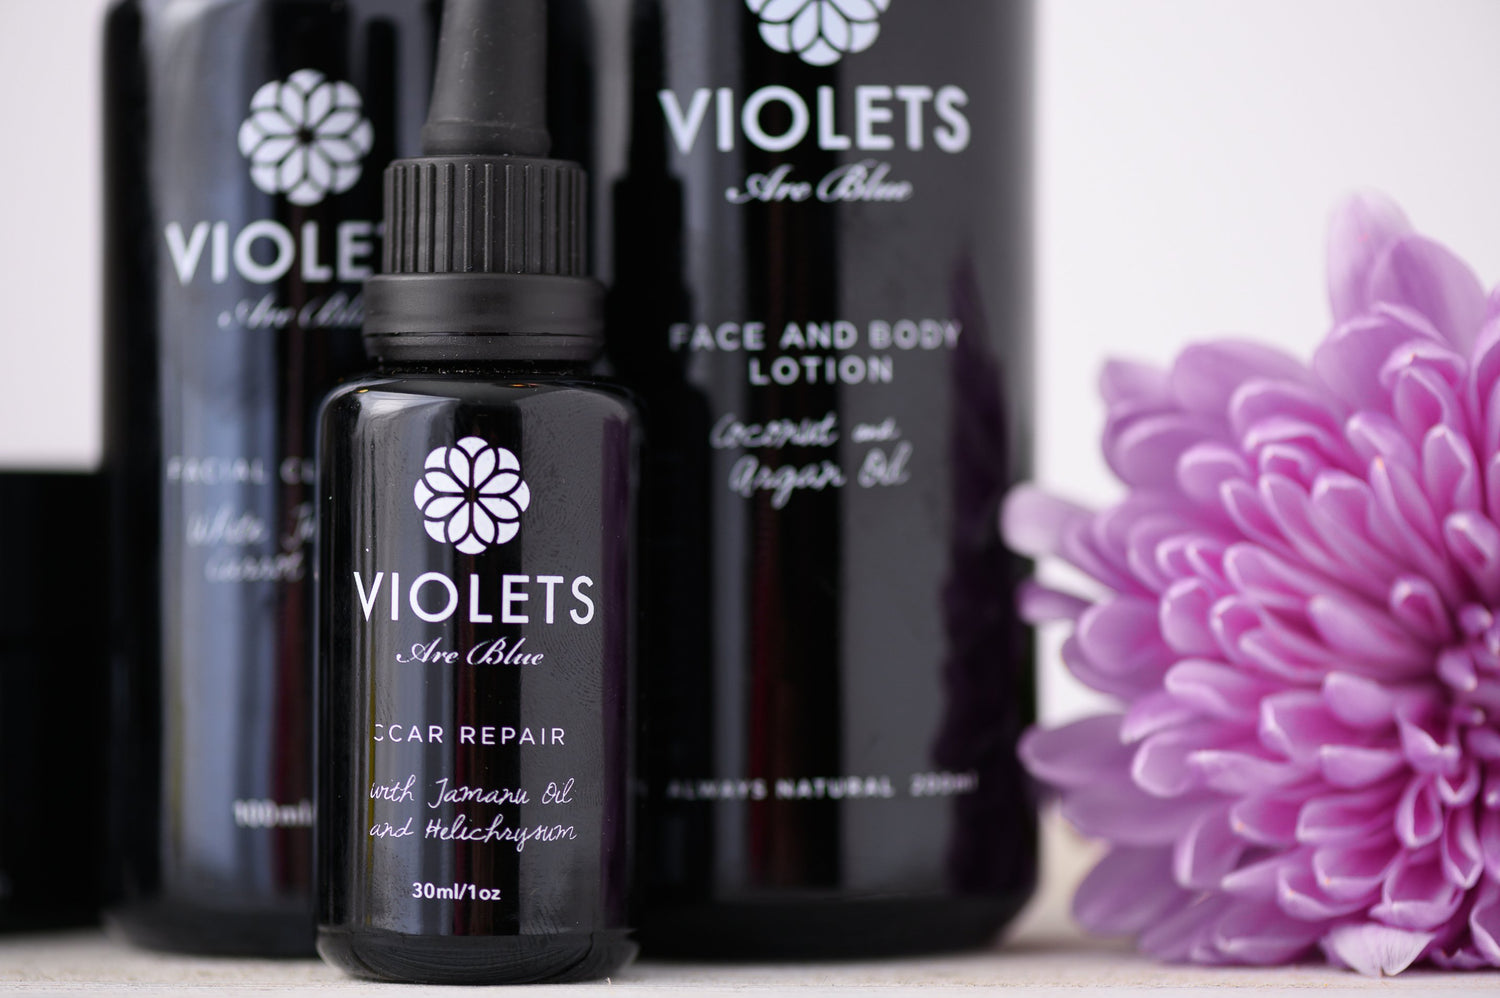 11 Uses for Violets Are Blue Scar Repair